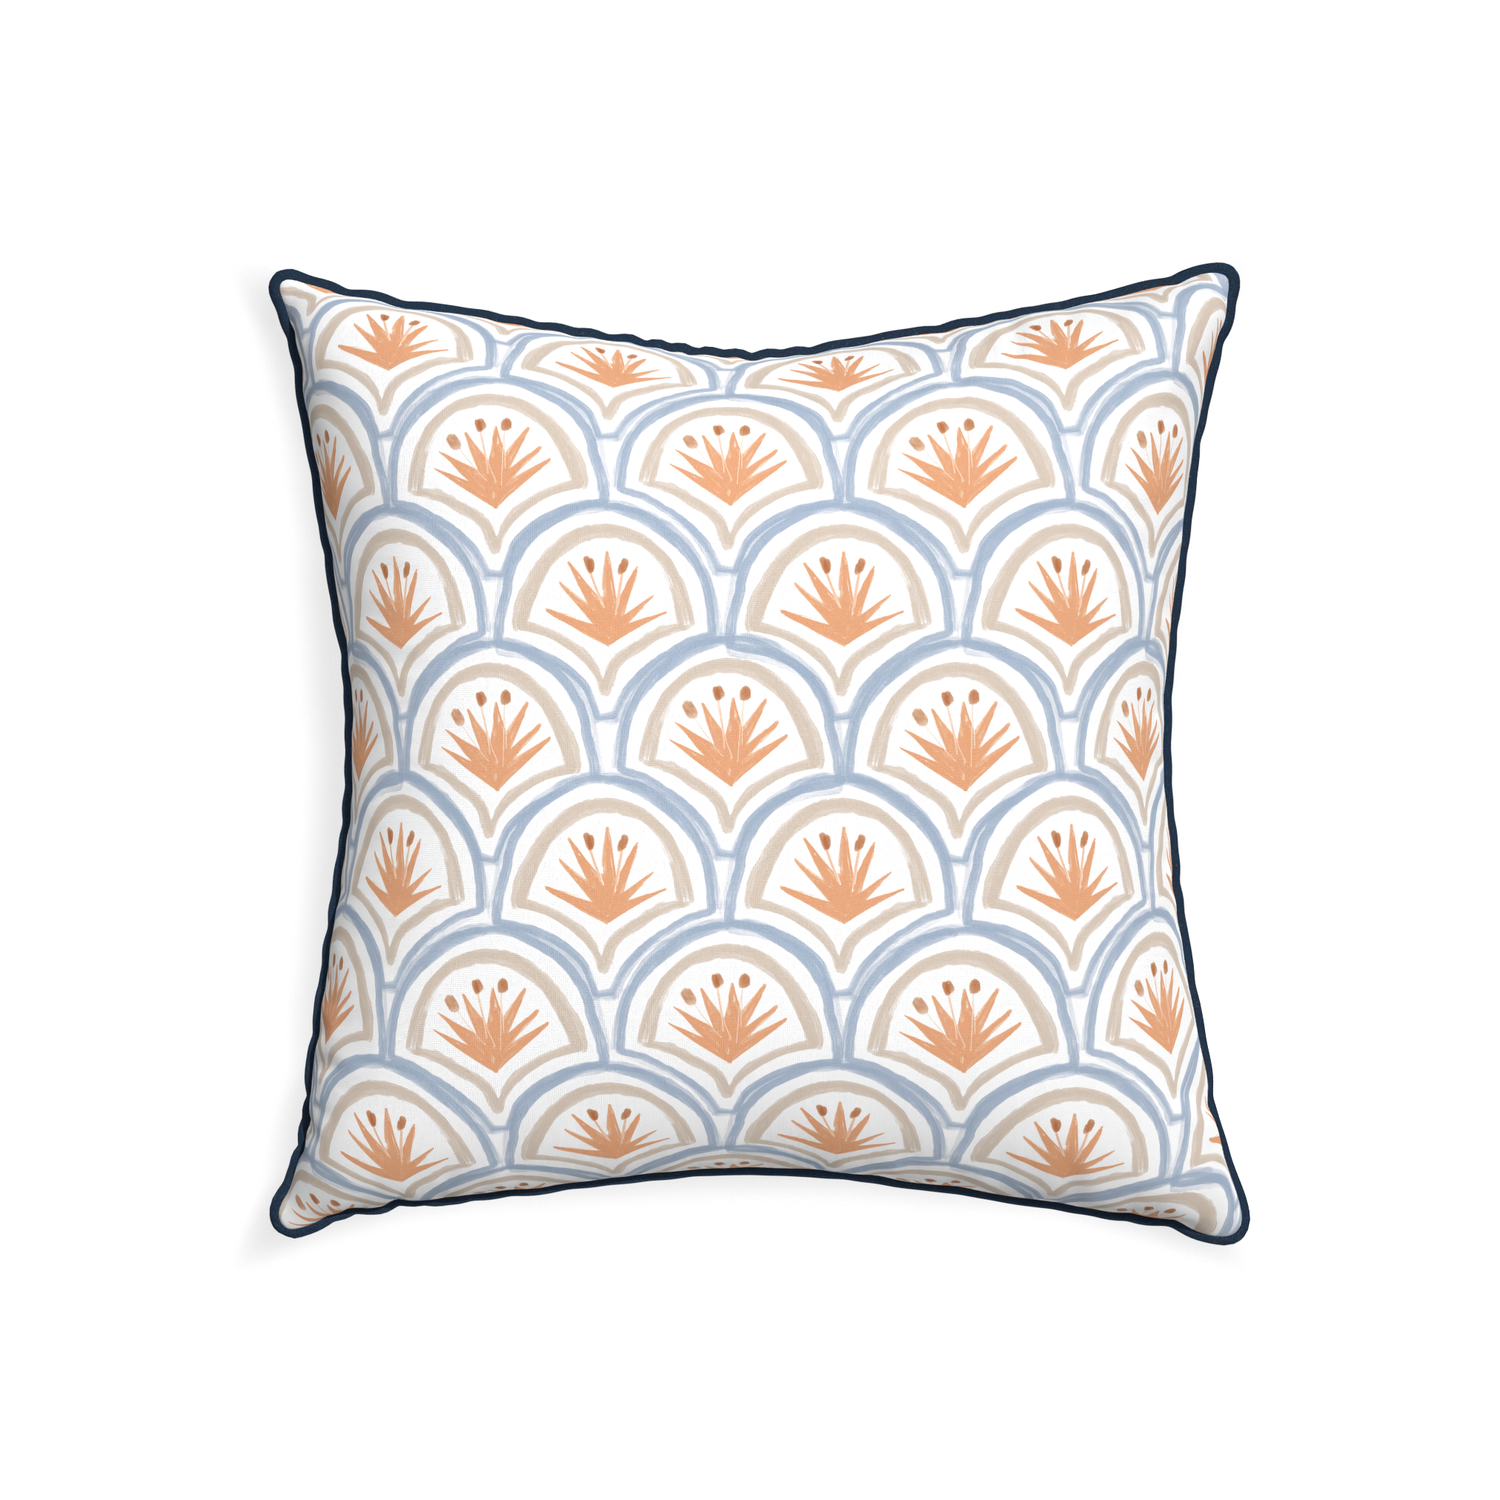 22-square thatcher apricot custom art deco palm patternpillow with c piping on white background